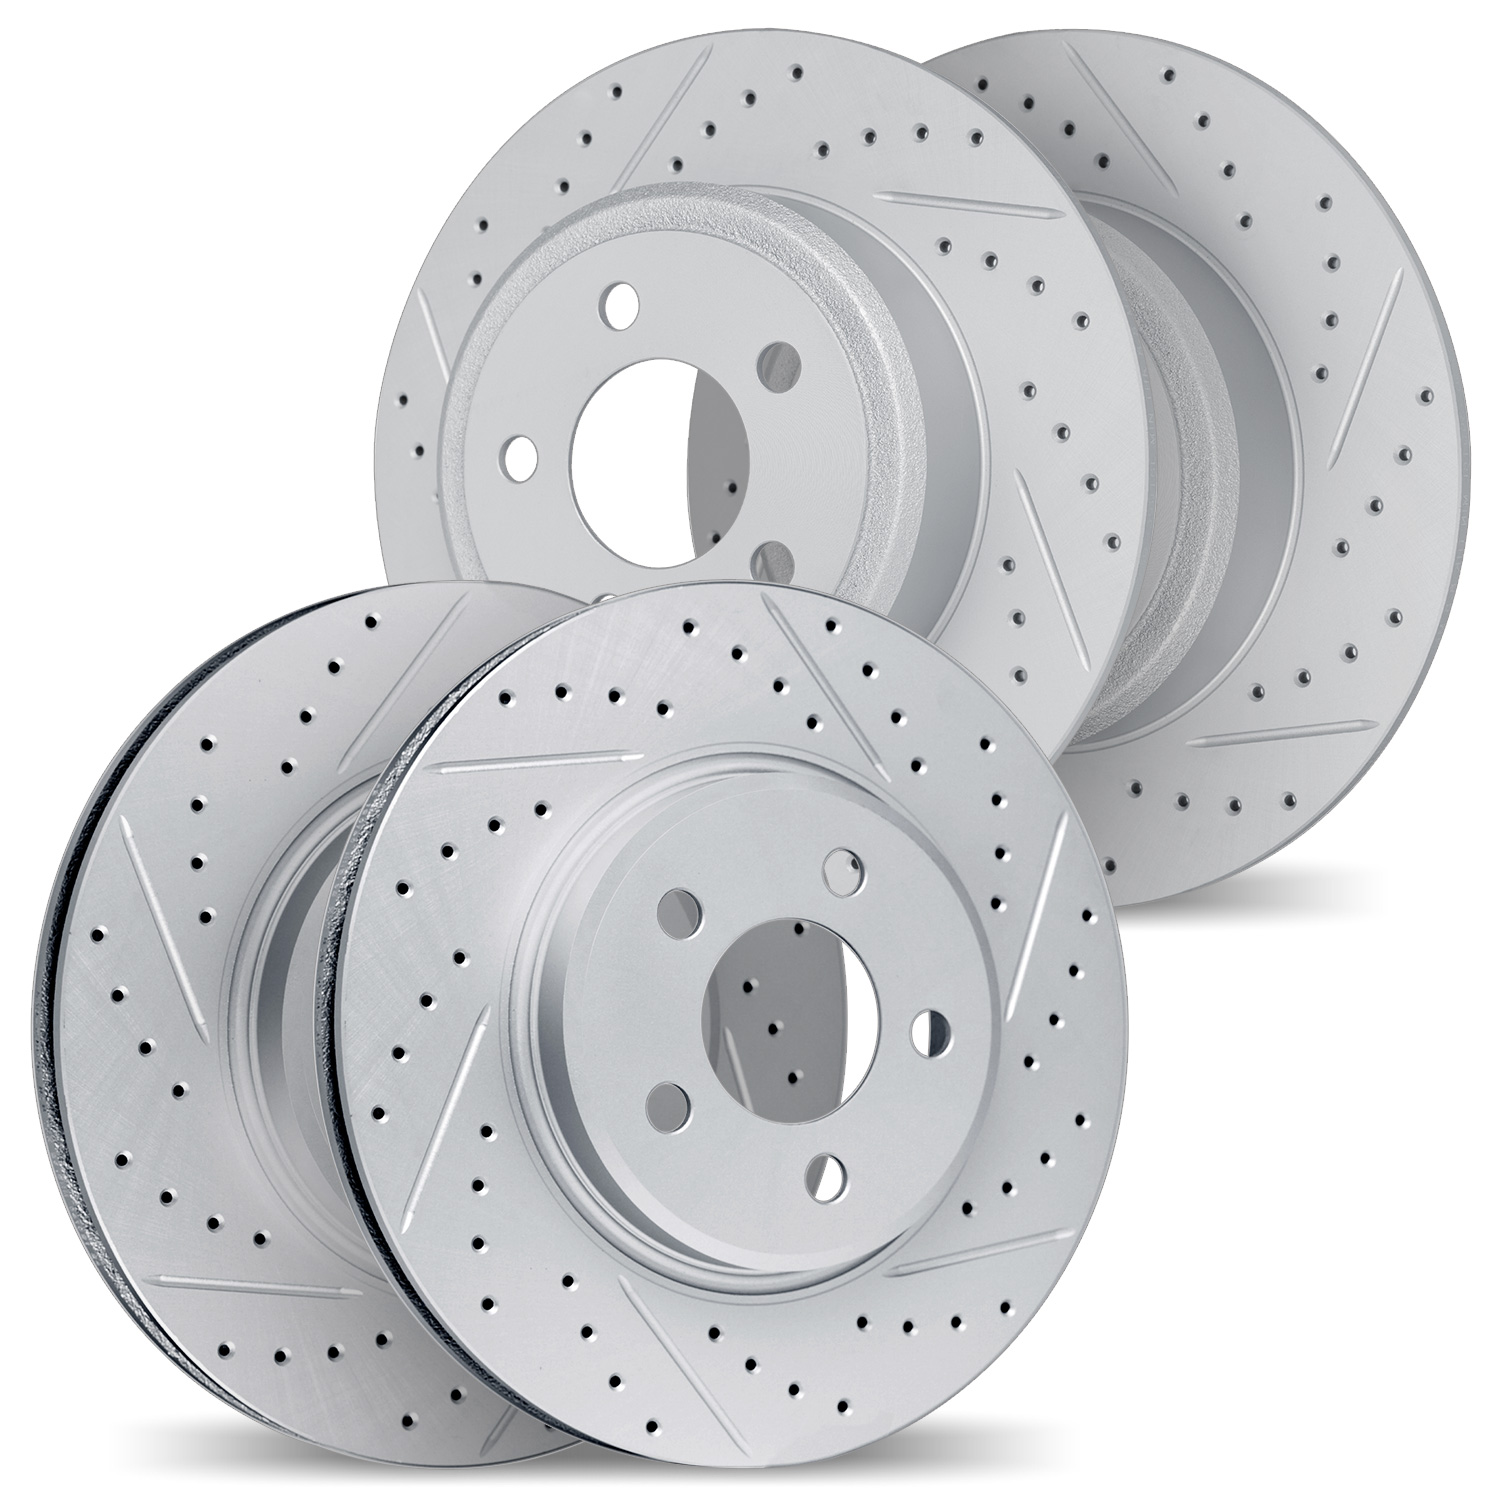 2004-03070 Geoperformance Drilled/Slotted Brake Rotors, Fits Select Kia/Hyundai/Genesis, Position: Front and Rear